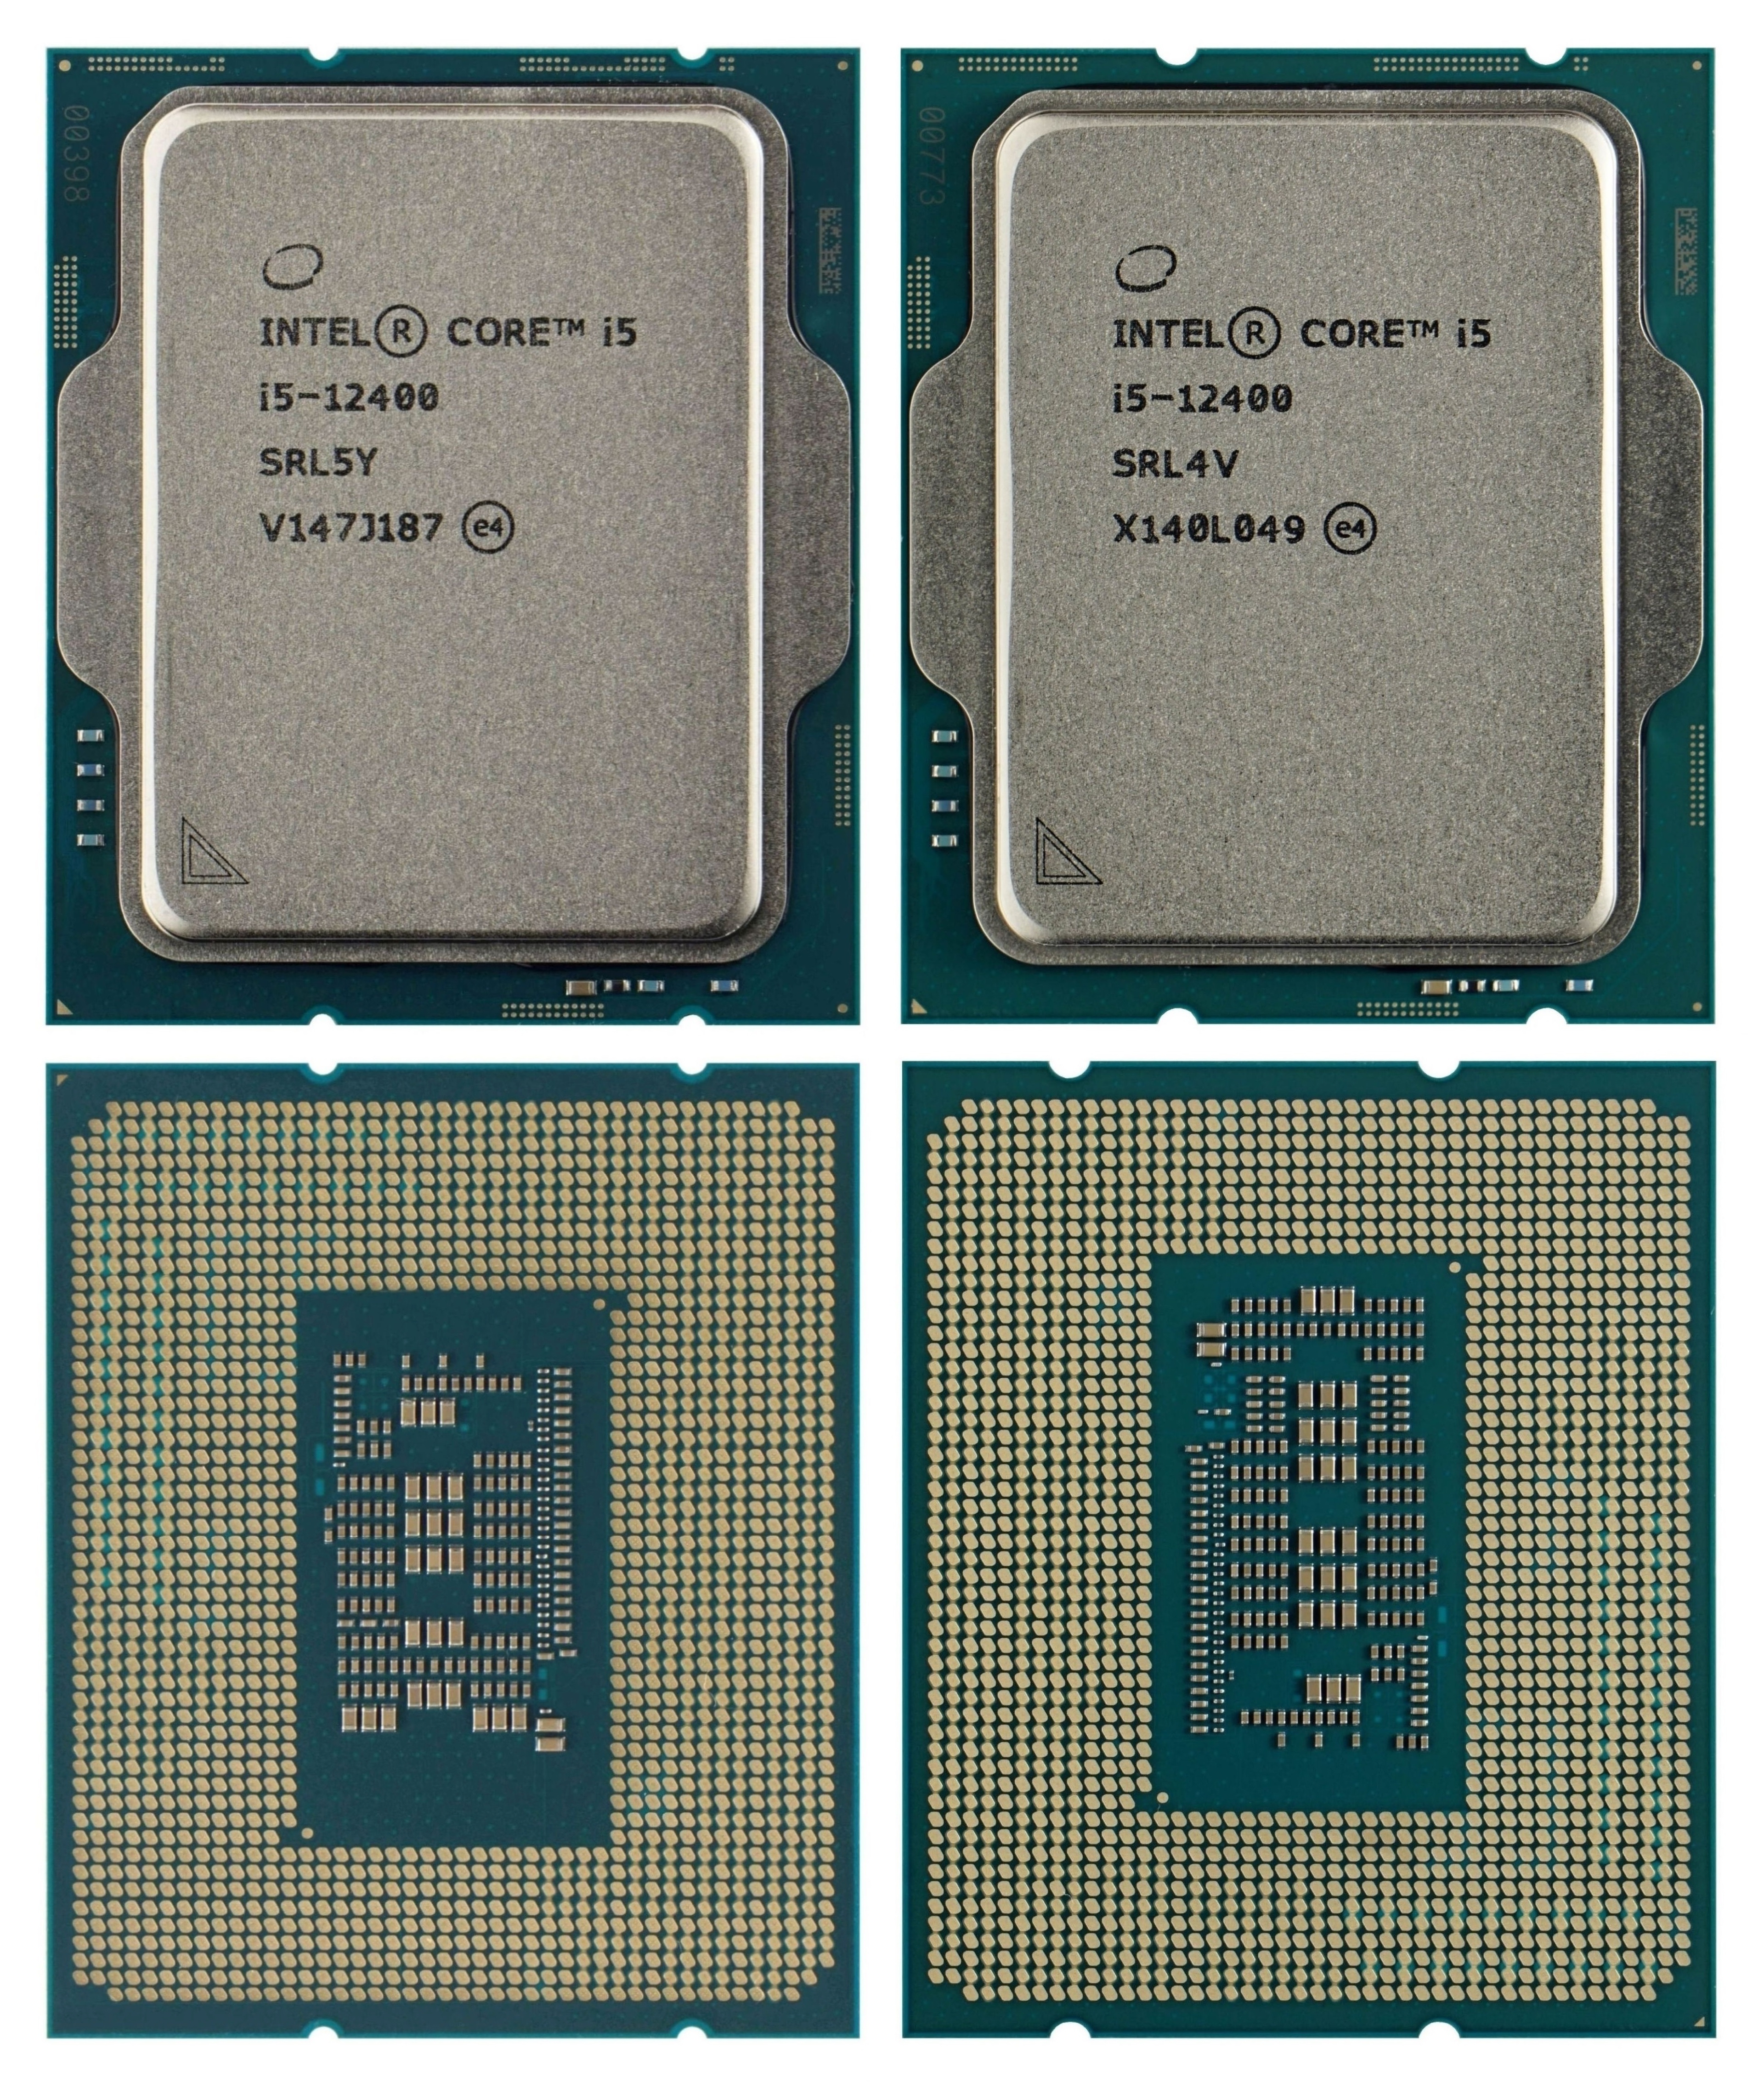 The same and yet different. Intel Core i5-12400 duel (H0 vs. C0) 